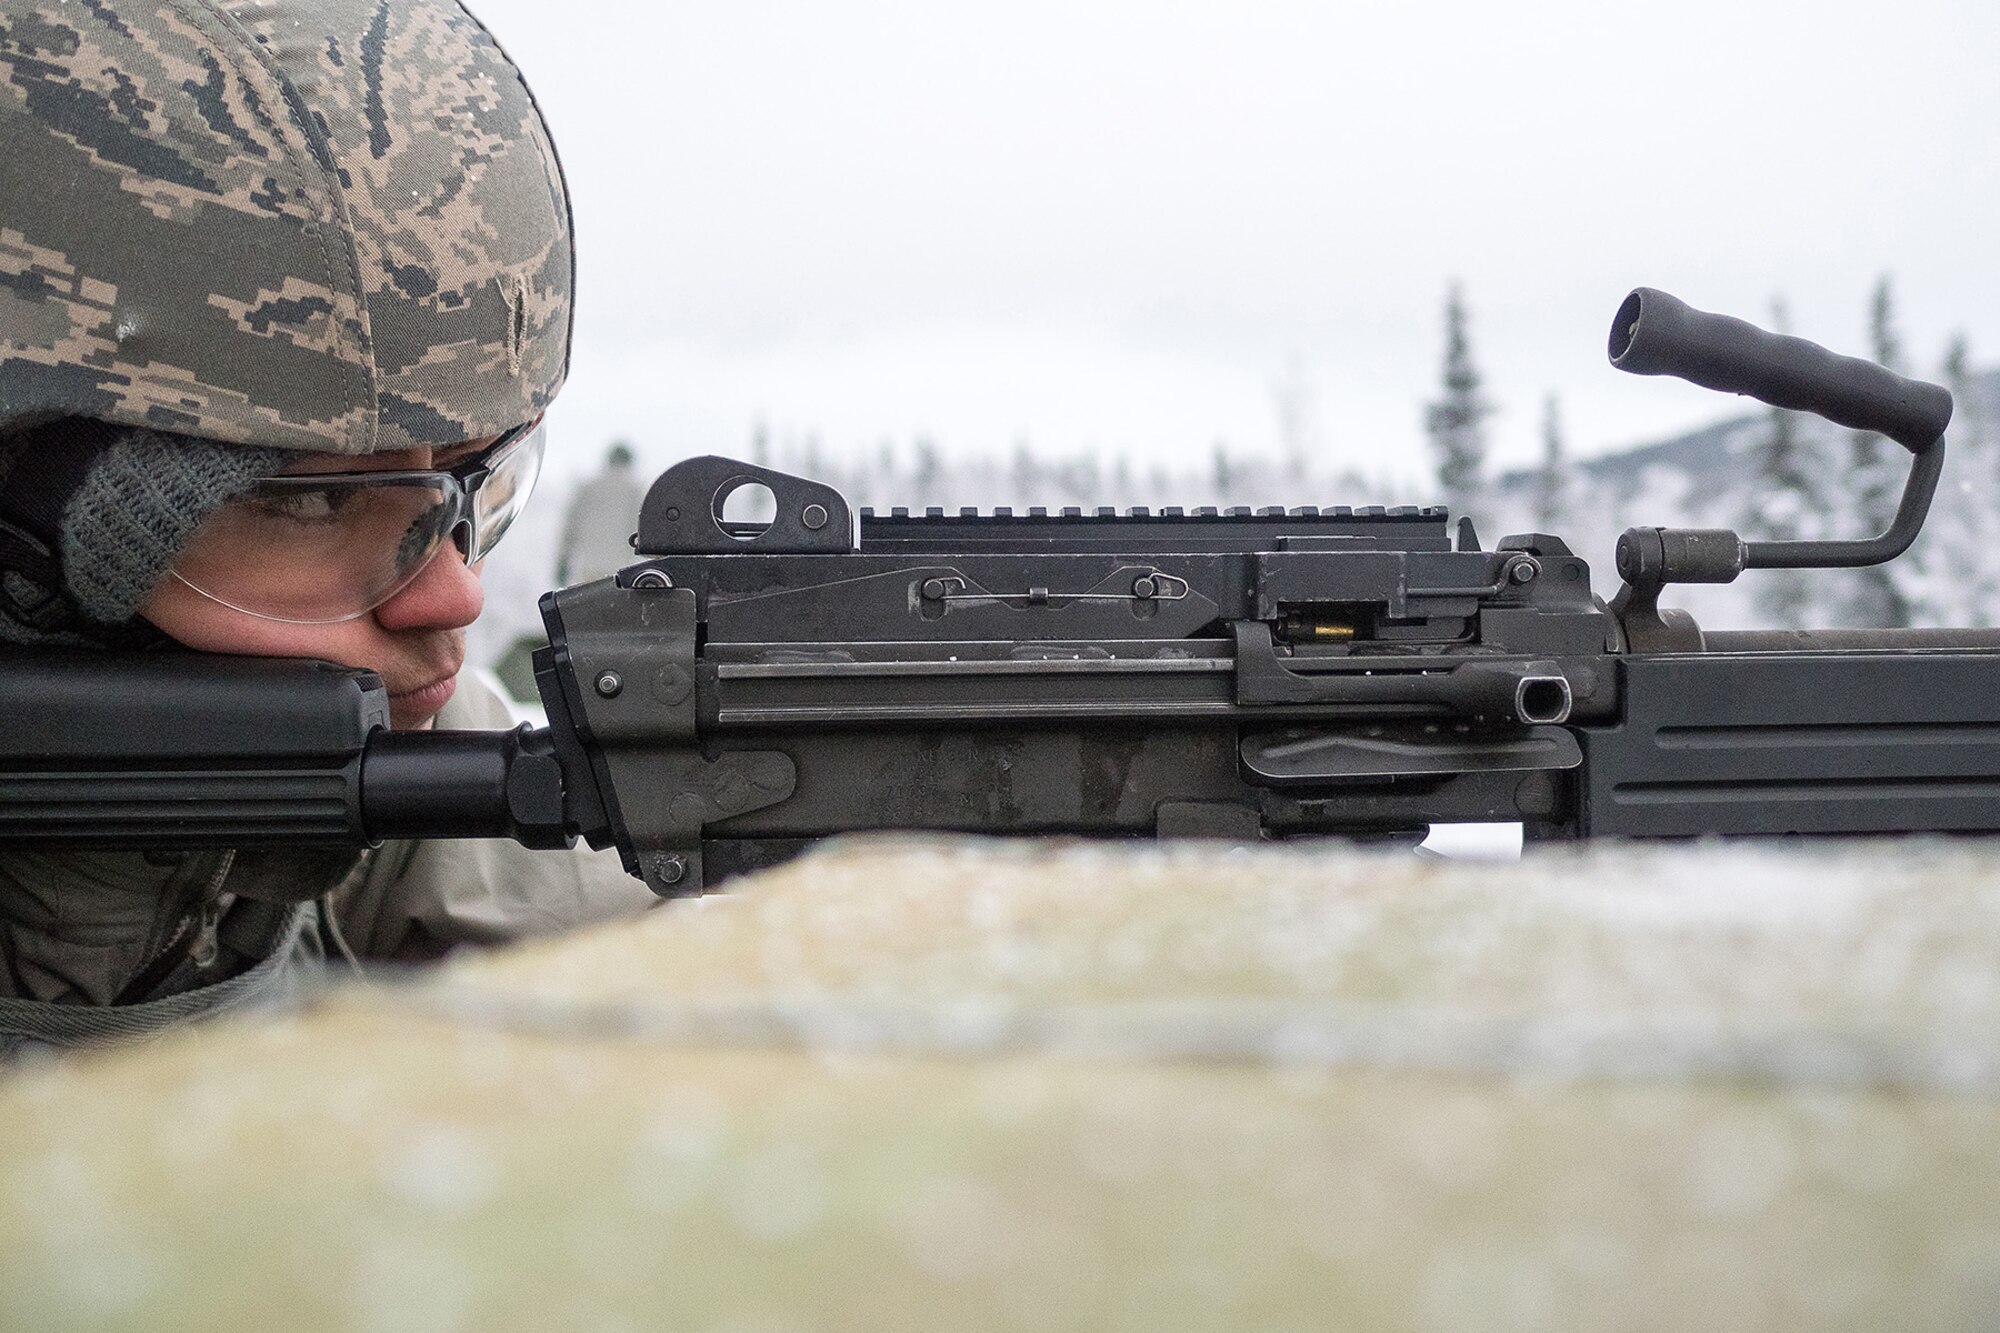 An Airman assigned to the 673d Security Forces Squadron lines up a traget with an M249 Squad Automatic Weapon during machine gun qualification range on Joint Base Elmendorf-Richardson, Alaska, Jan. 10, 2018. Security Forces Airmen perform extensive training in law enforcement as well as combat tactics to protect U.S. Military bases and assets both stateside and overseas.